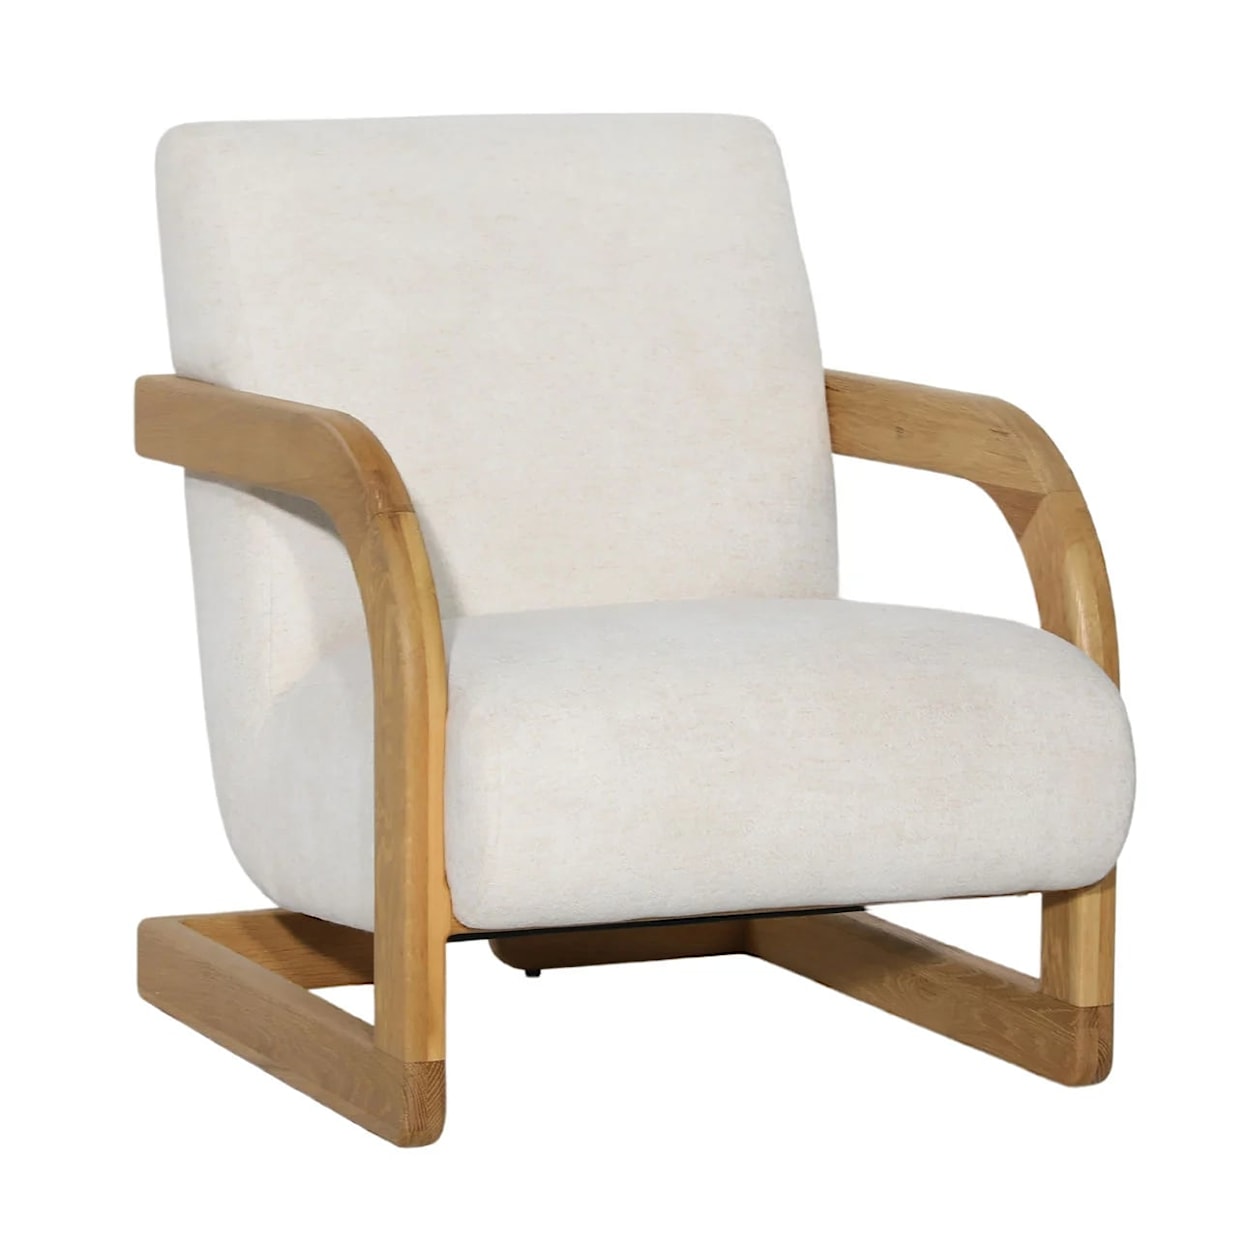 Dovetail Furniture Elin Accent Chair